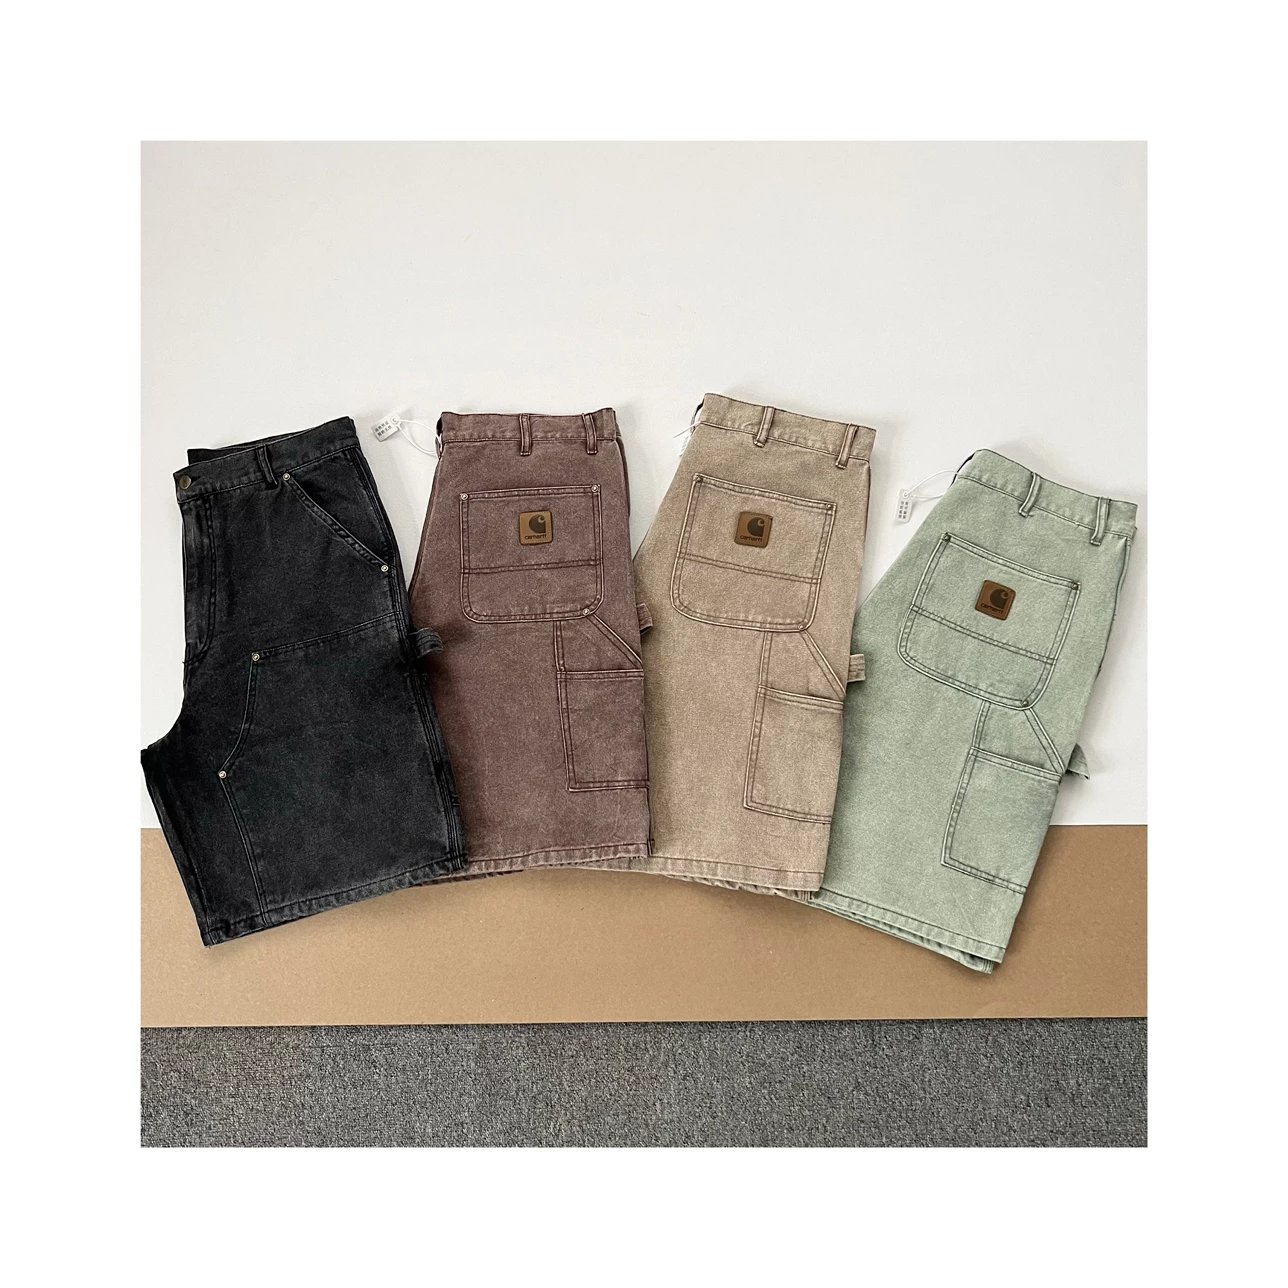 Item Thumbnail for 【Heavy Industry Washed Old】Original Quality Car Kaha T B80 Washed Old Double Knee Riveted Felling Pants Frock Shorts Men and women